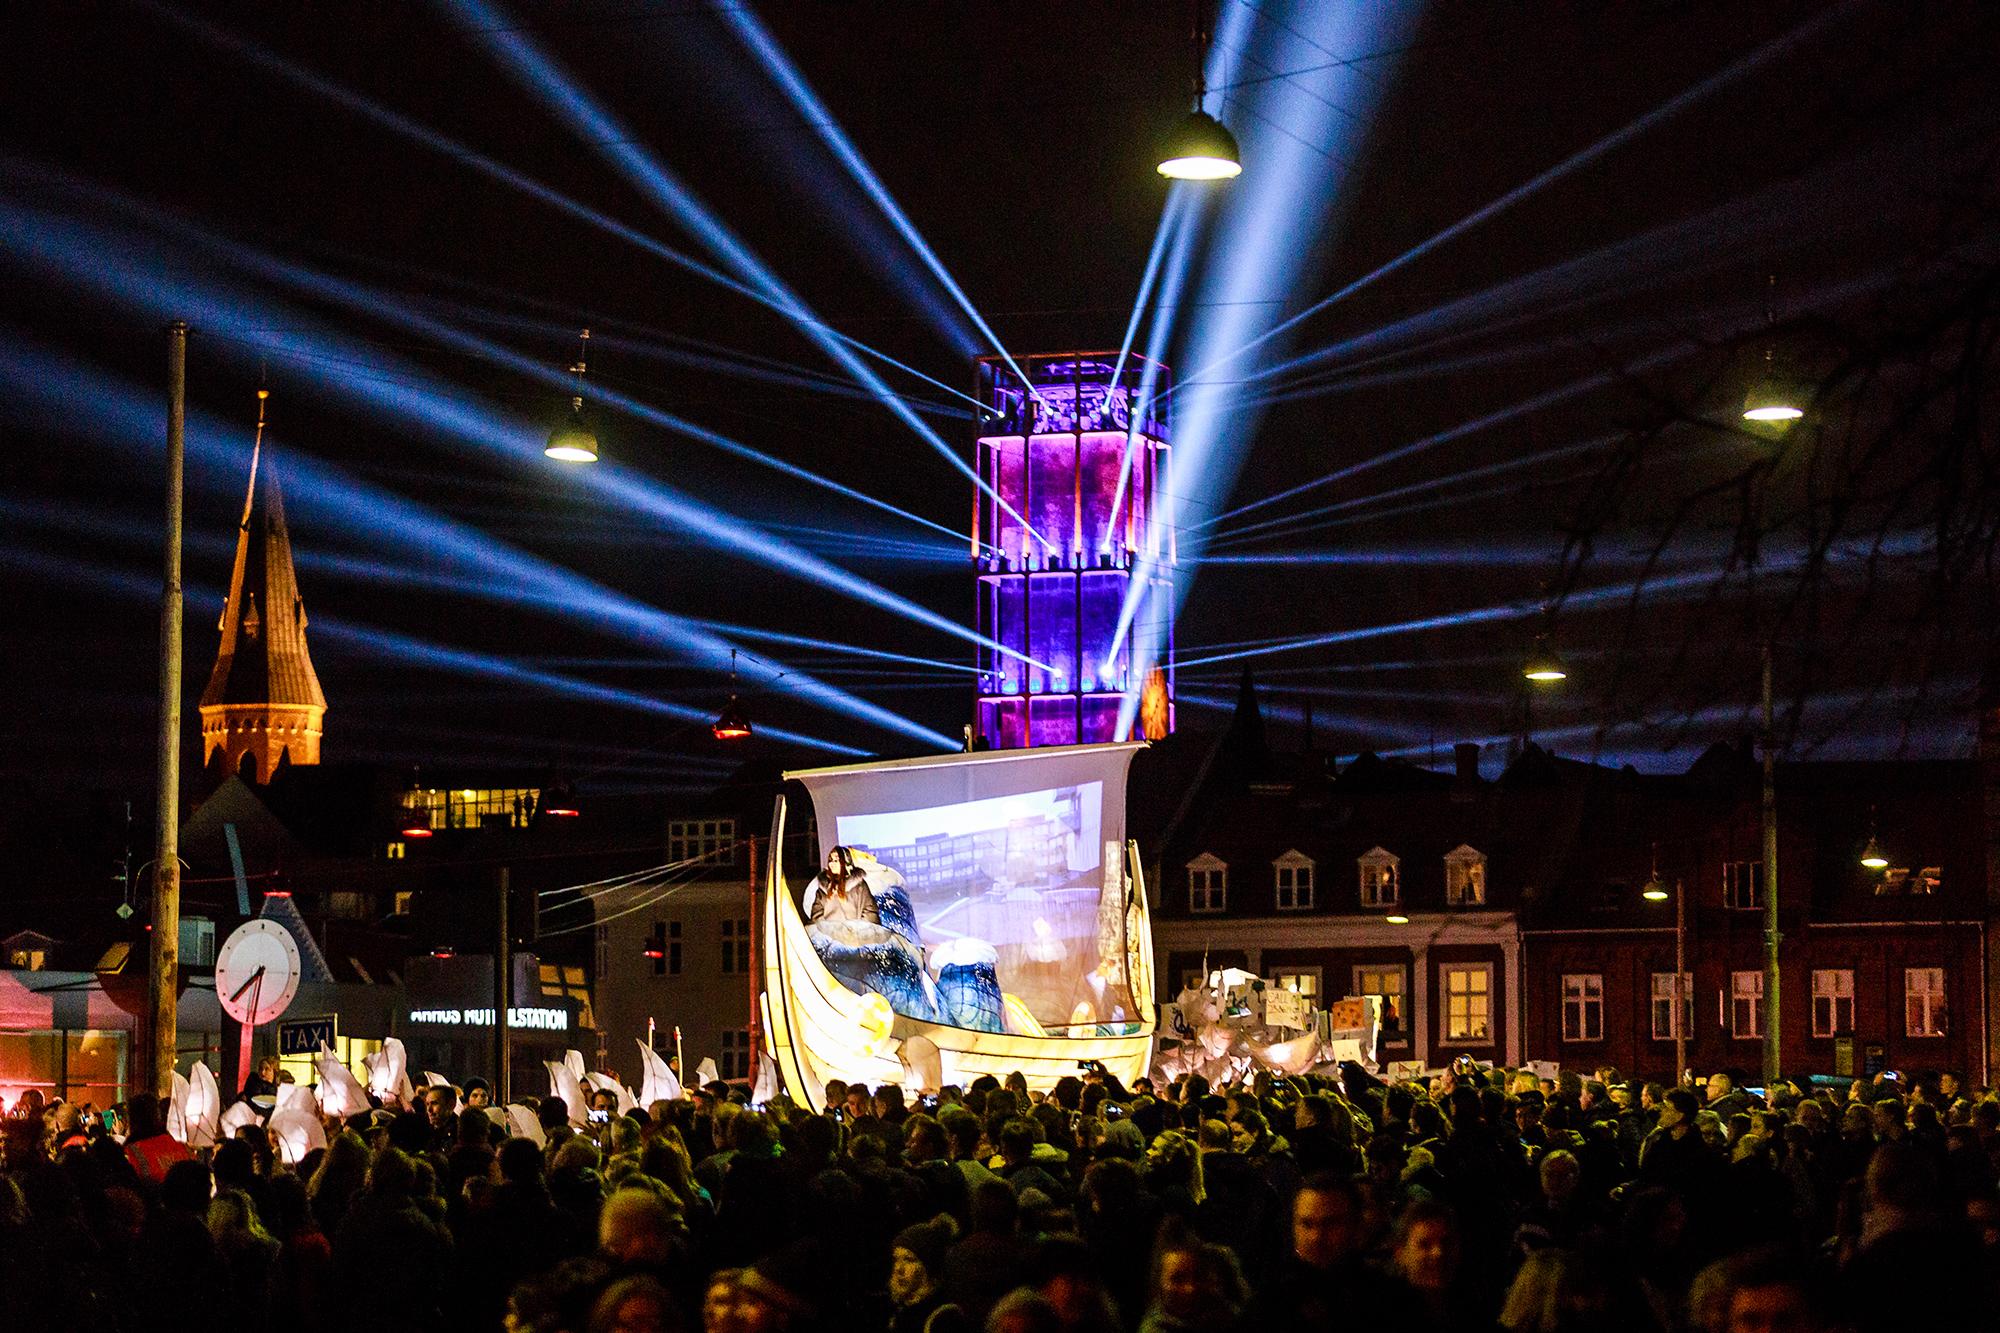 The lantern boat makes its way through the crowd as a purple and pink lit tower throws spotlights into the night sky.